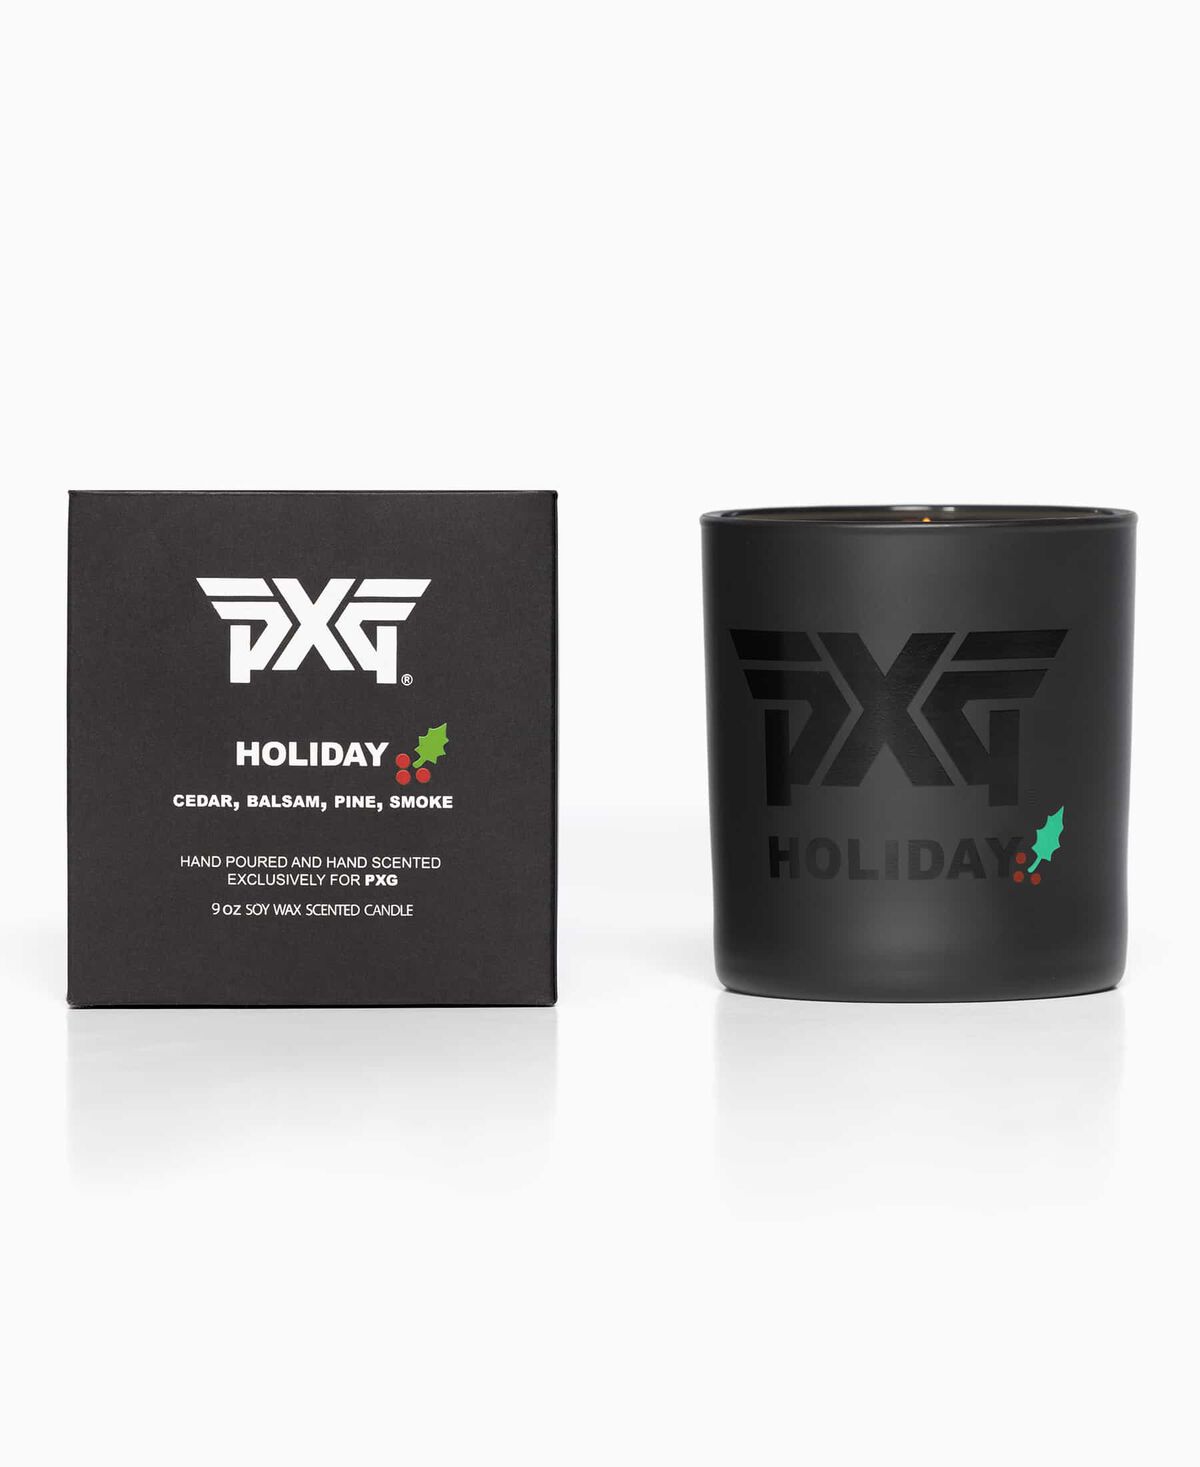 PXG Holiday Candle 